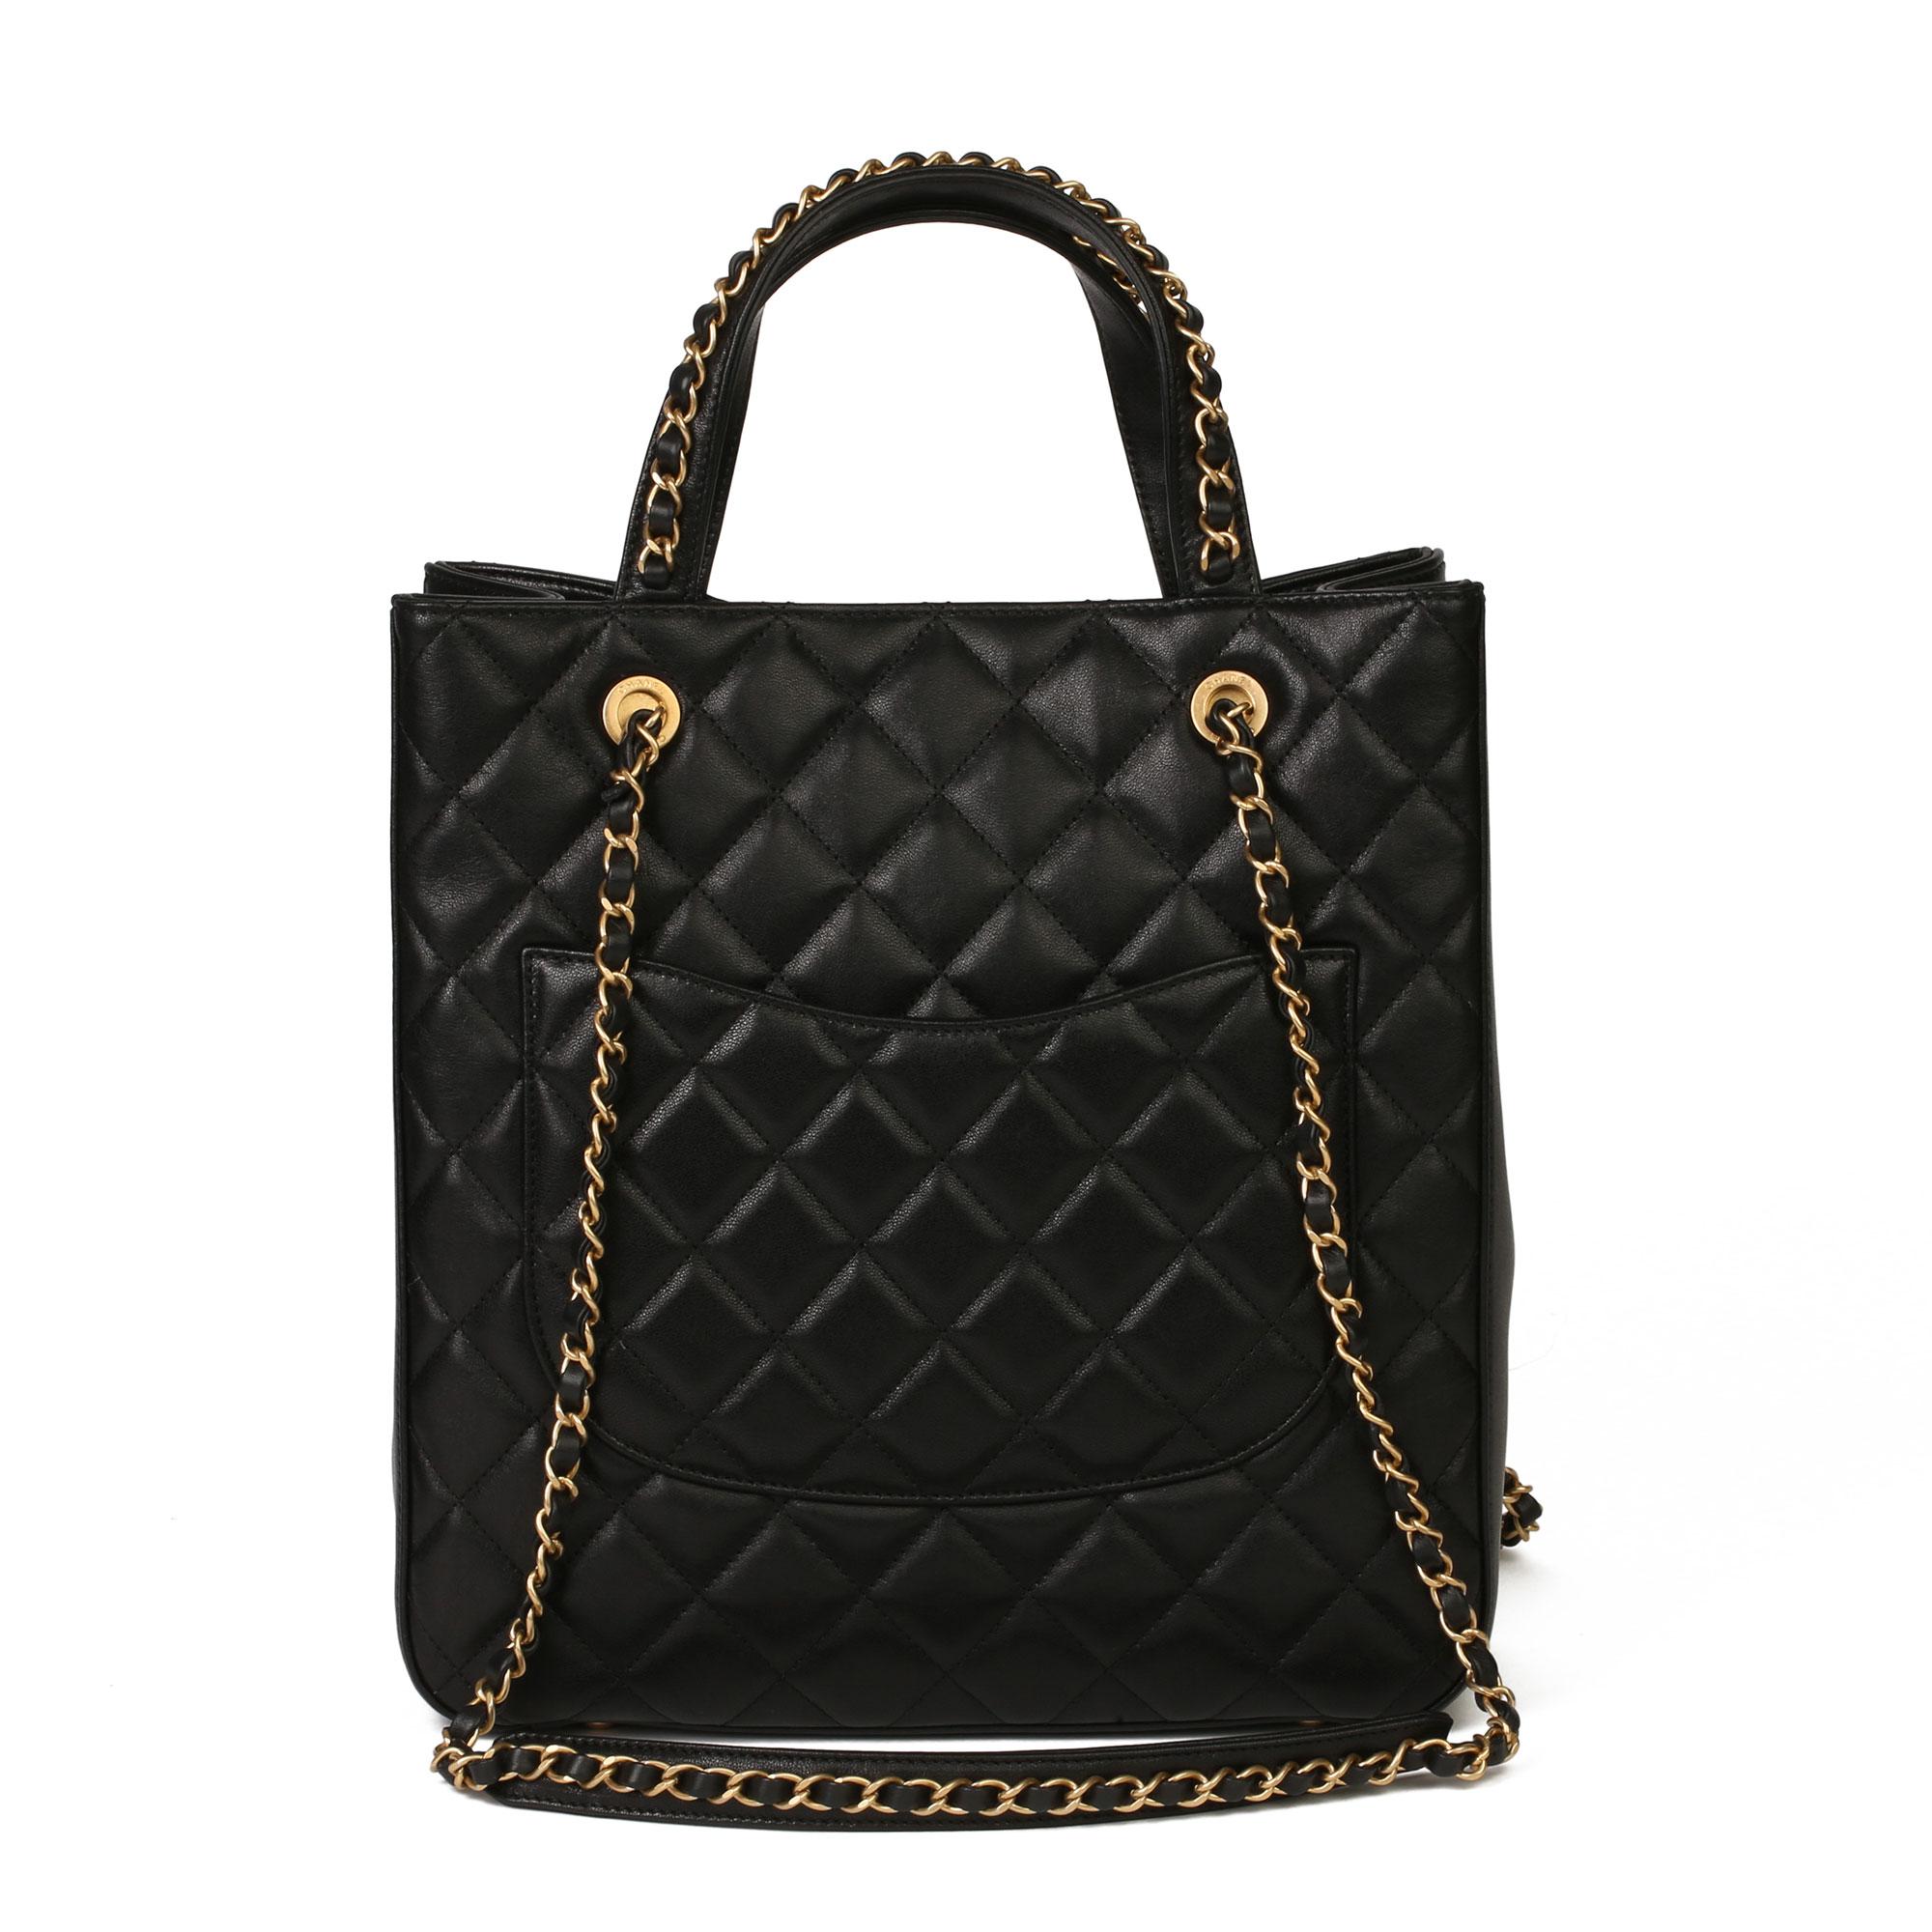 chanel quilted calfskin leather handbag